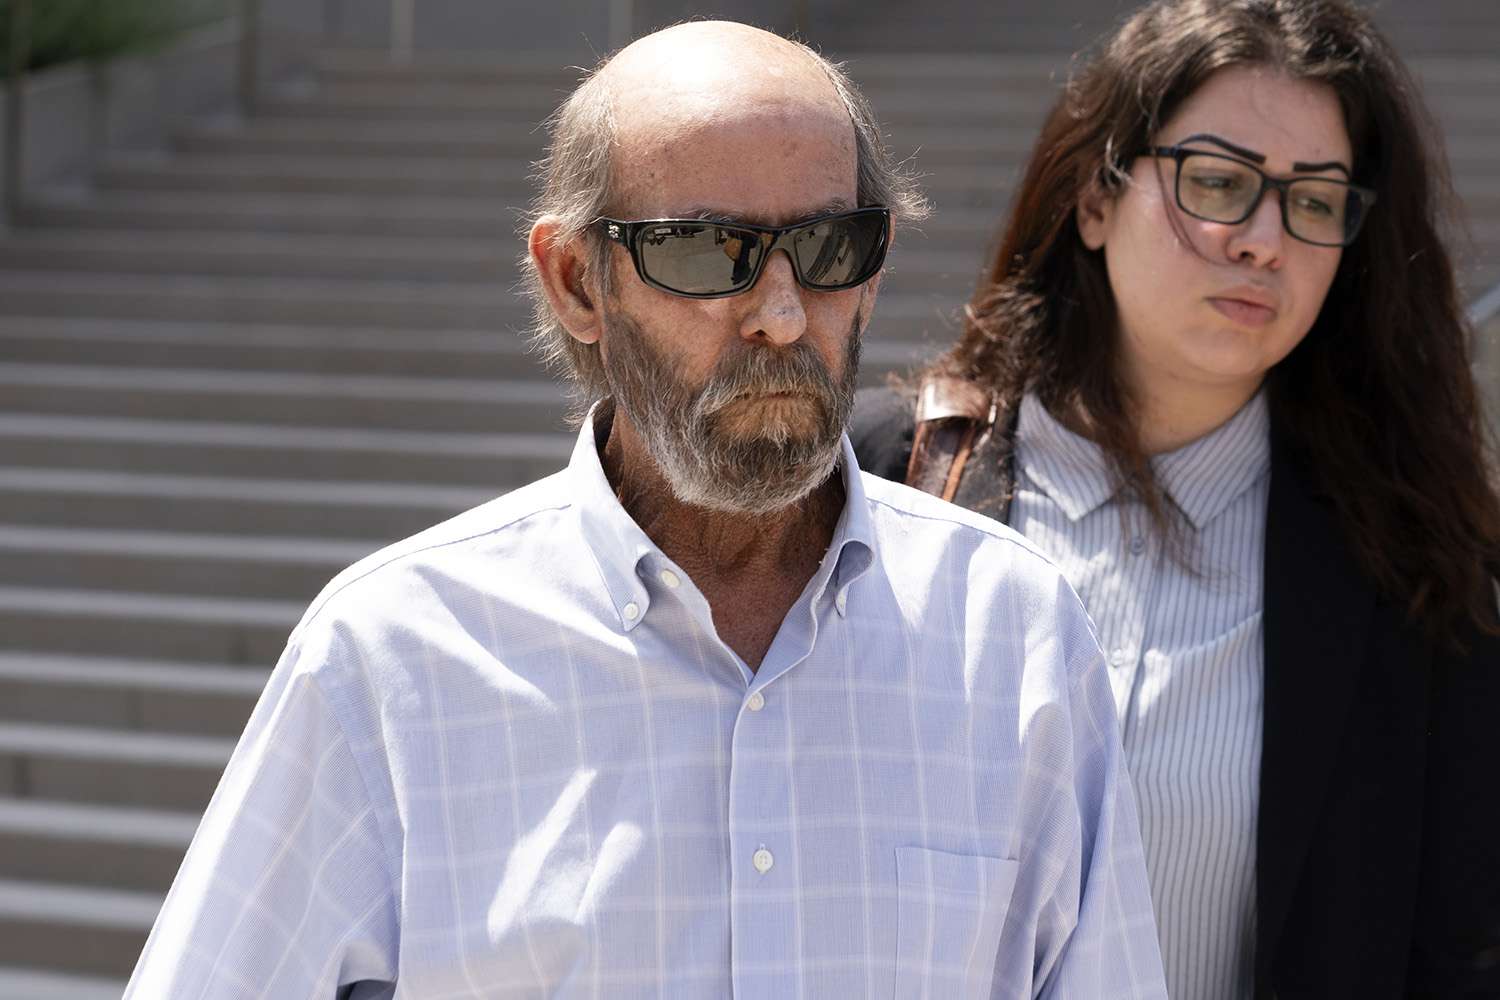 Boat Captain Sentenced to 4 Years Over Calif. Fire That Killed 34: 'Cowardice and Repeated Failures'